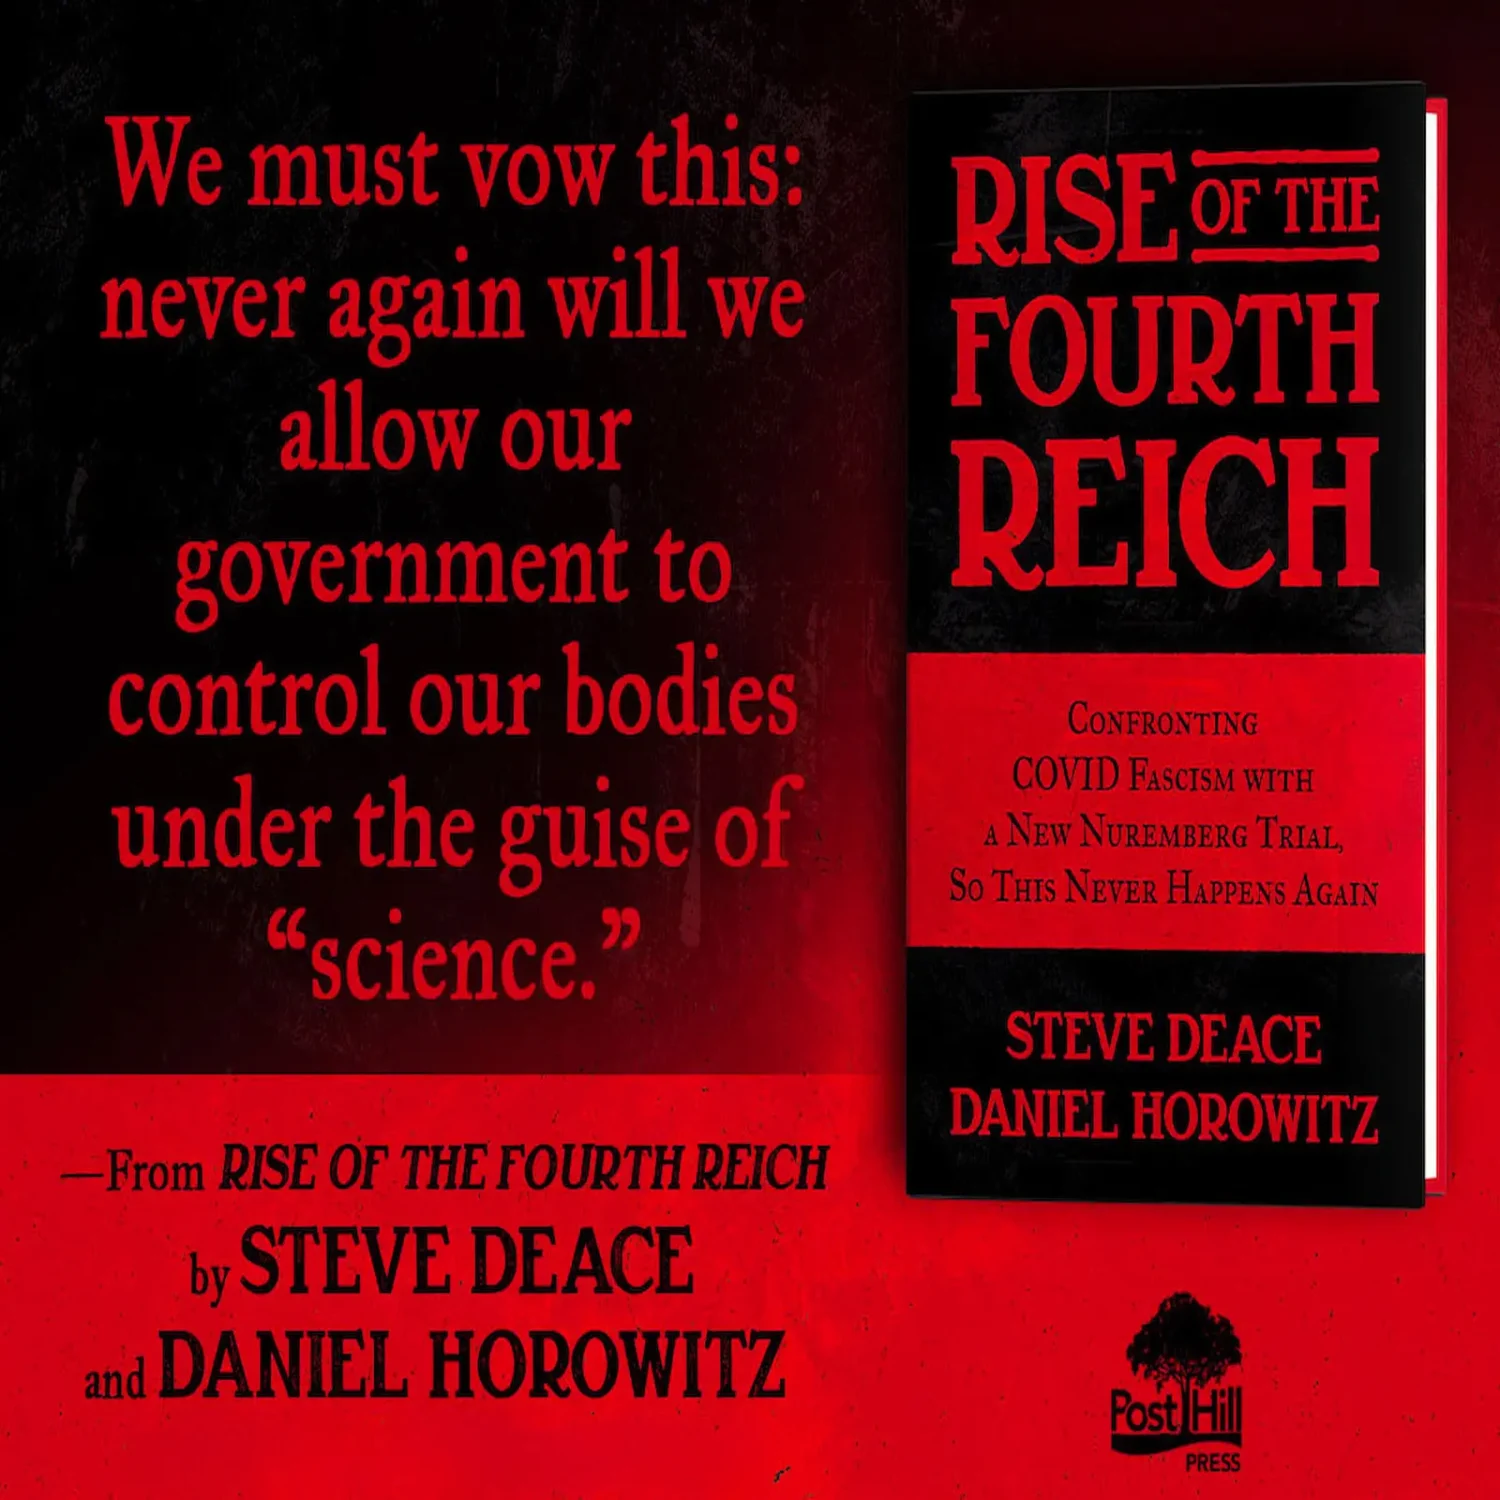 Get ‘Rise of the Fourth Reich’ by Deace and Horowitz NOW